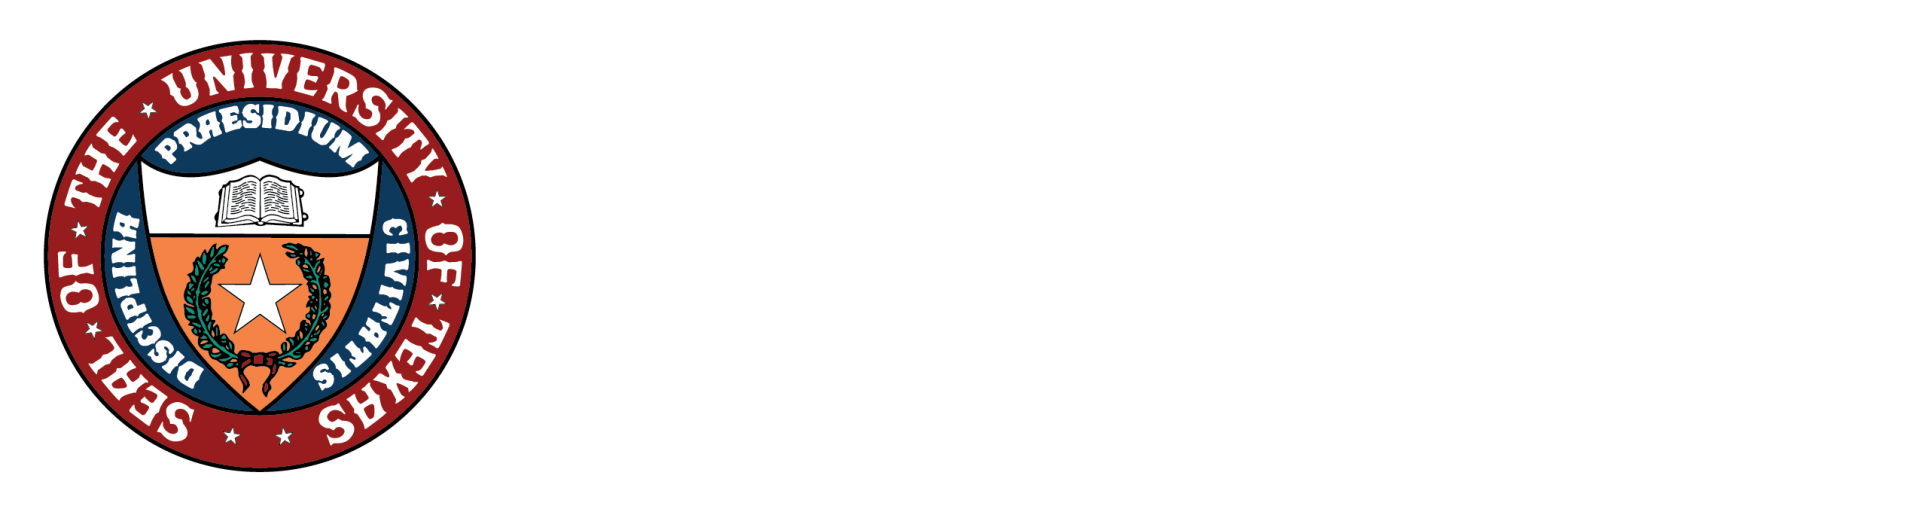 The UT System seal and wordmark